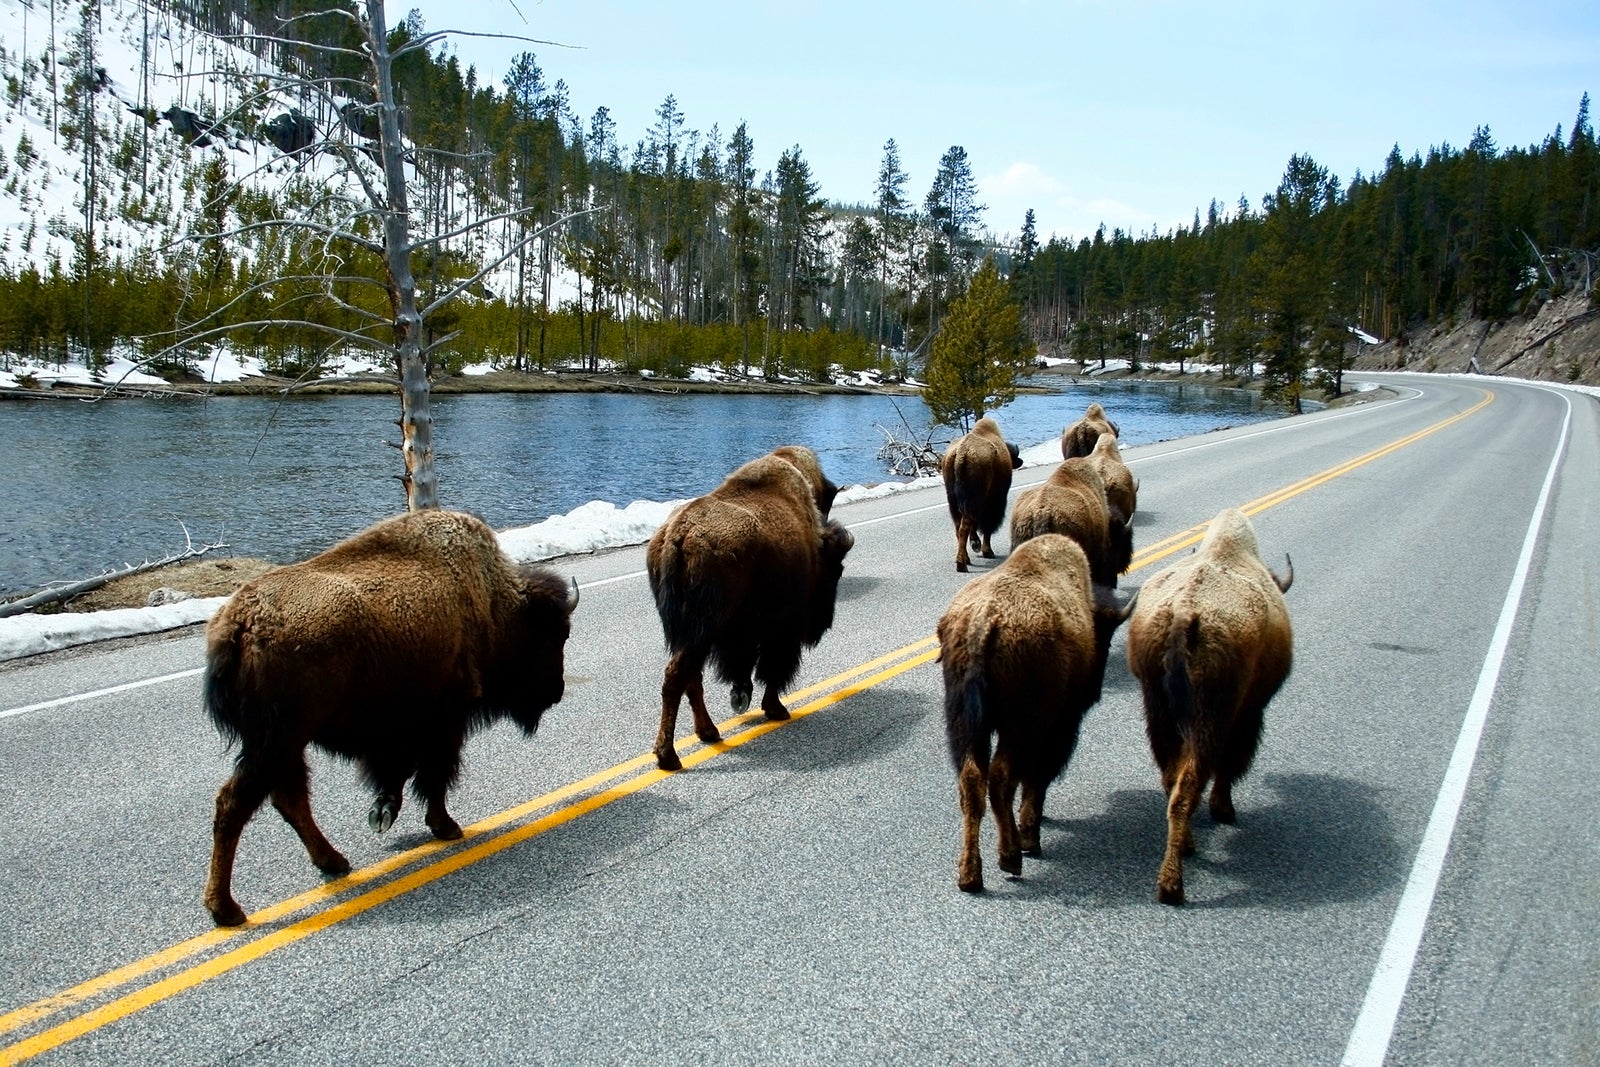 How to plan an epic road trip through Grand Teton and Yellowstone national parks